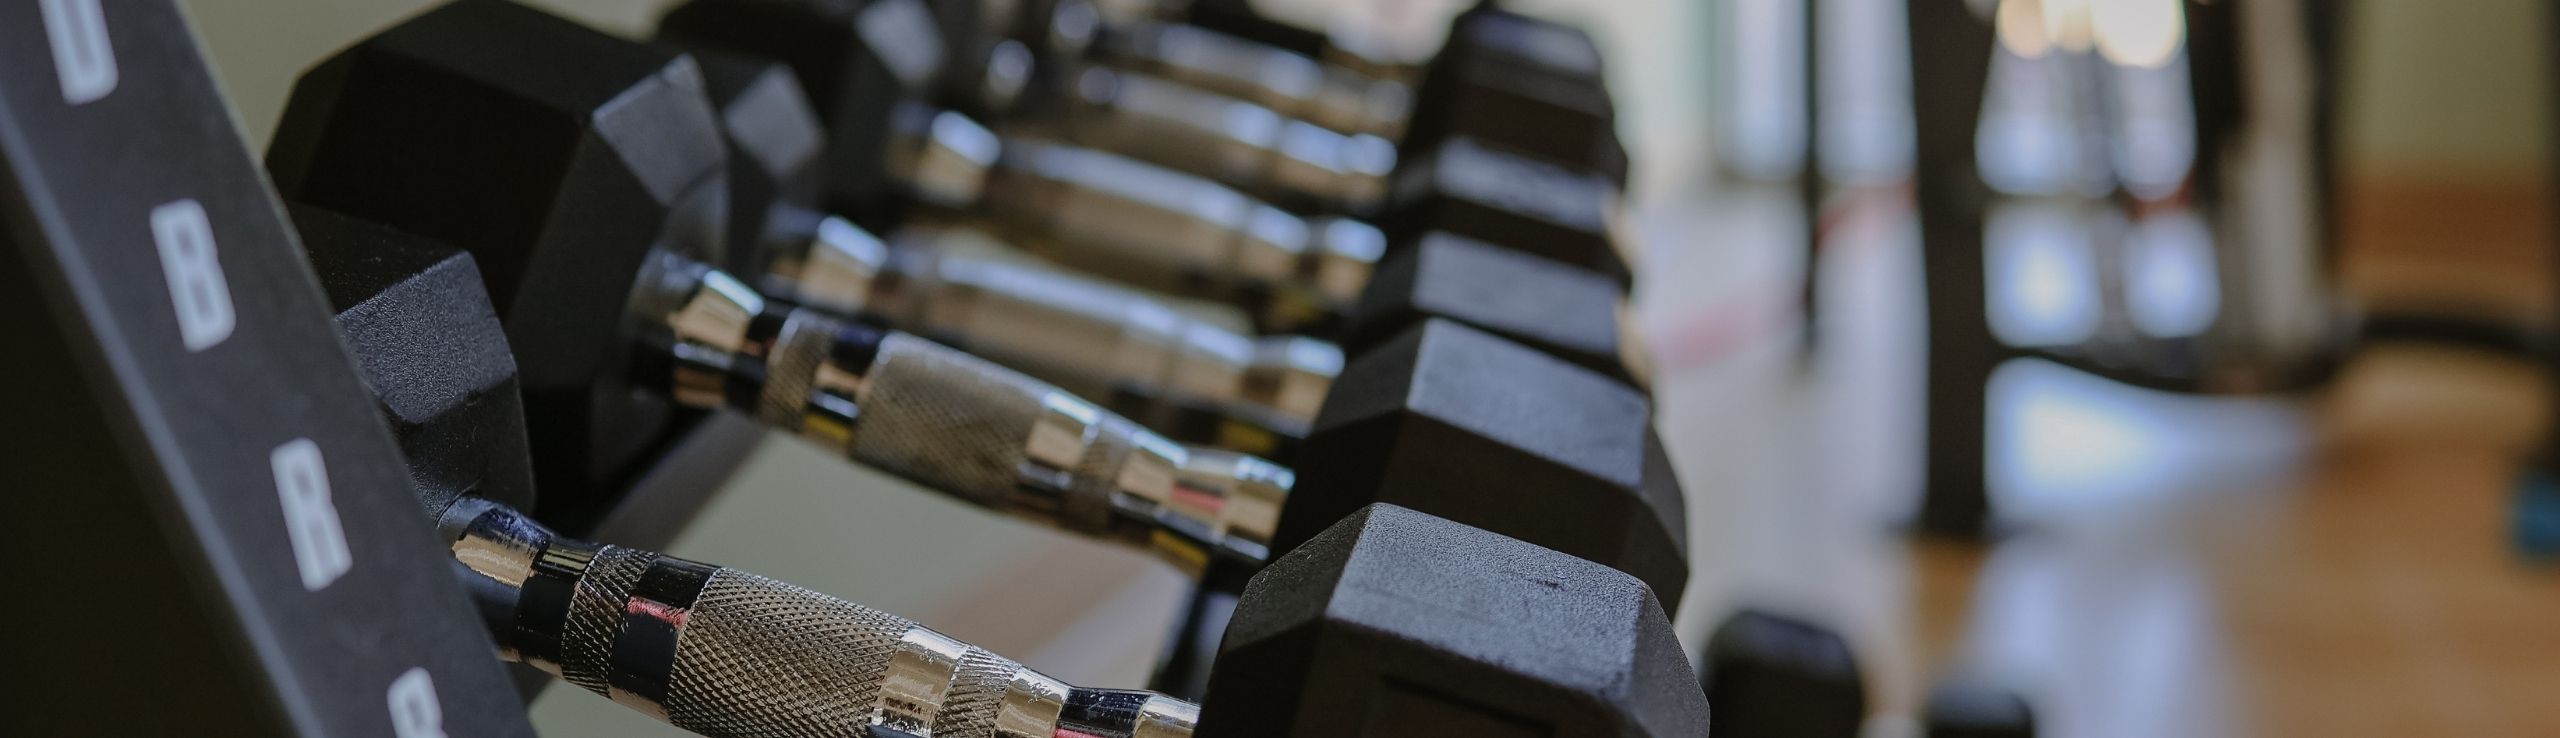 Dumbbells in the Hegg Wellness Center group fitness room in Rock Valley, IA